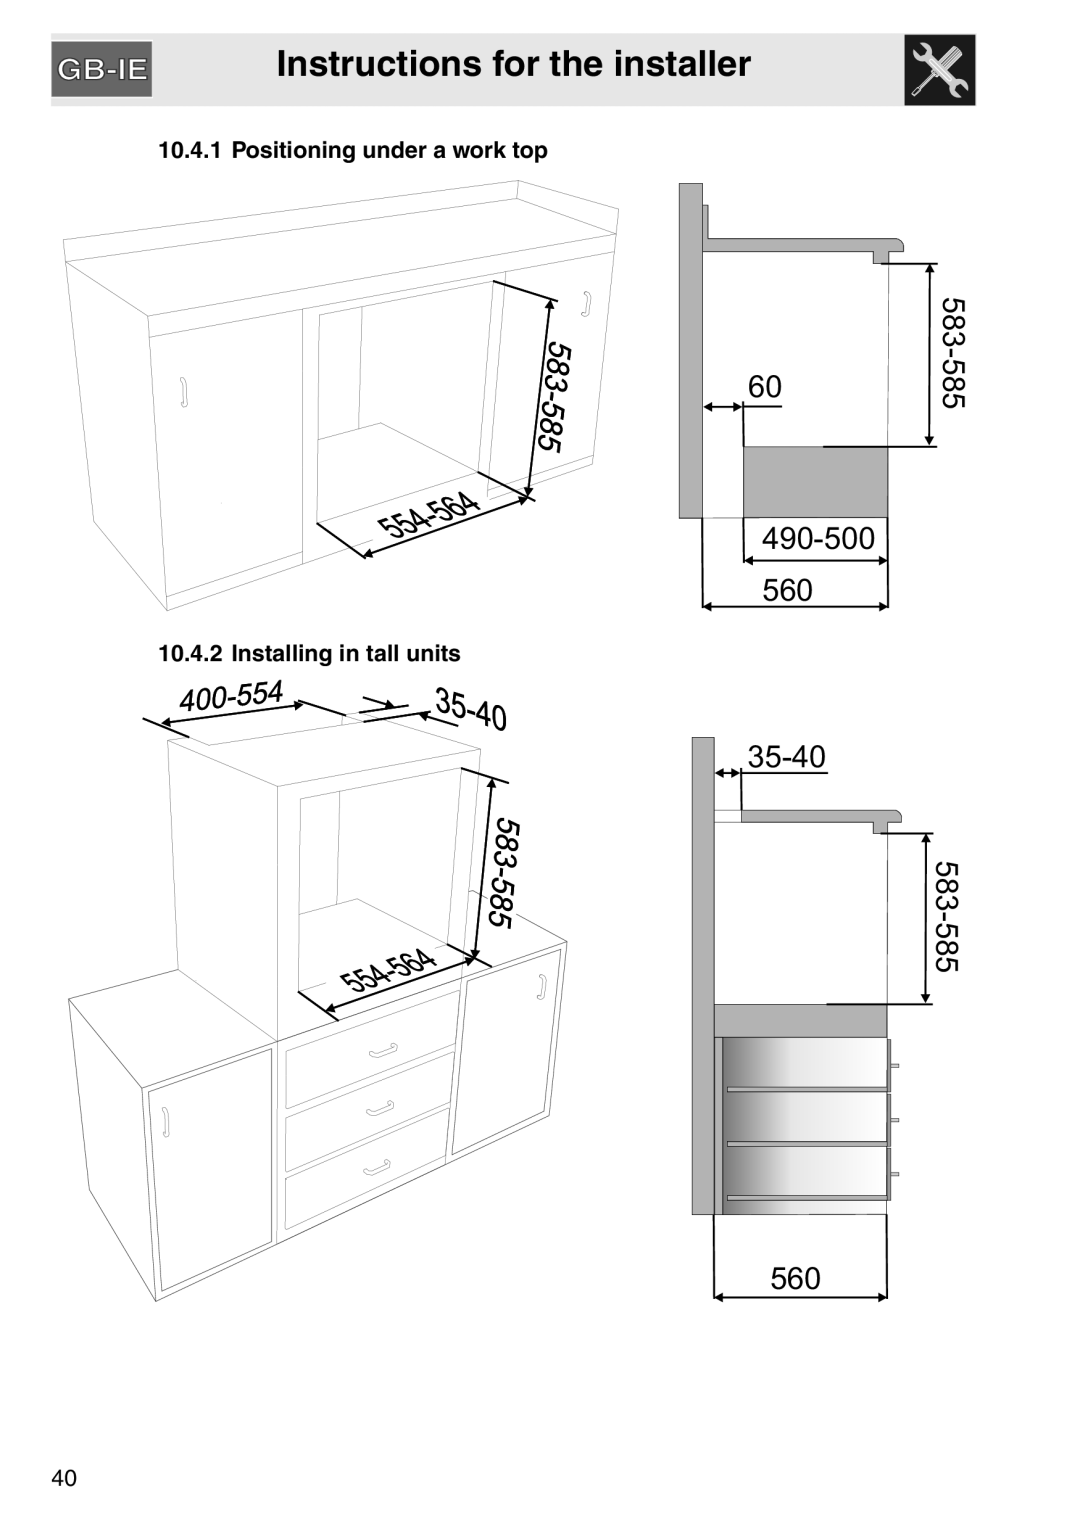 Smeg SAP306X-9, electric oven Instructions for the installer, 490-500, 35-40, 583-585, Positioning under a work top 